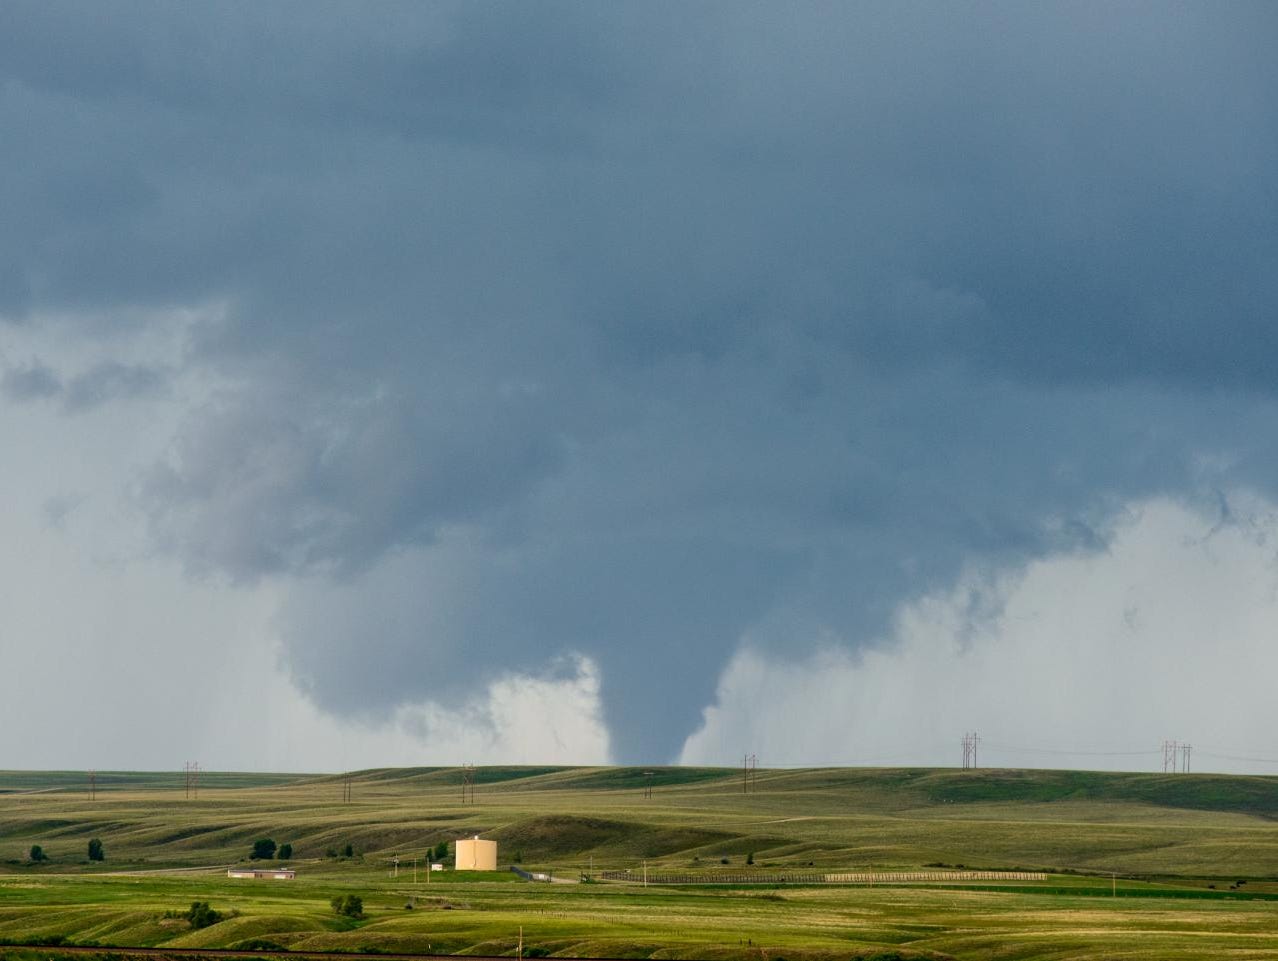 A tornado spins near Laramie Wyo., on June, 15, 2015. The number of tornadoes in outbreaks has been increasing in the past few decades.